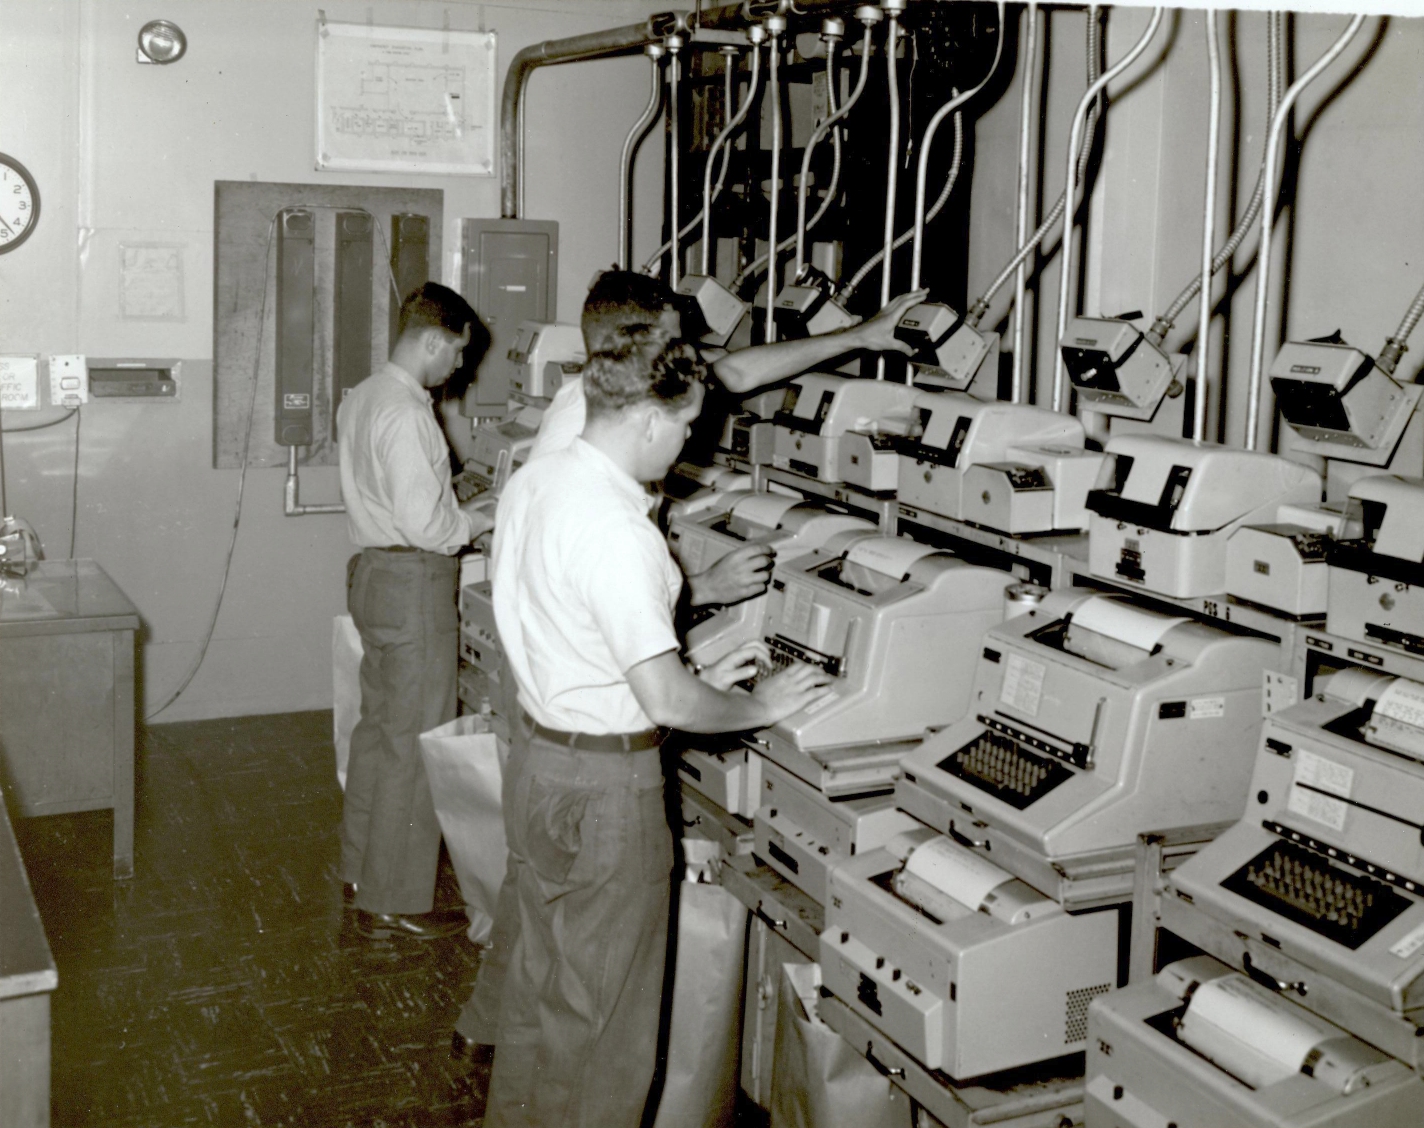 NAVCOMMSTA in Guam in 1969. The KWX-8 is operated by the man at the centre. [17]